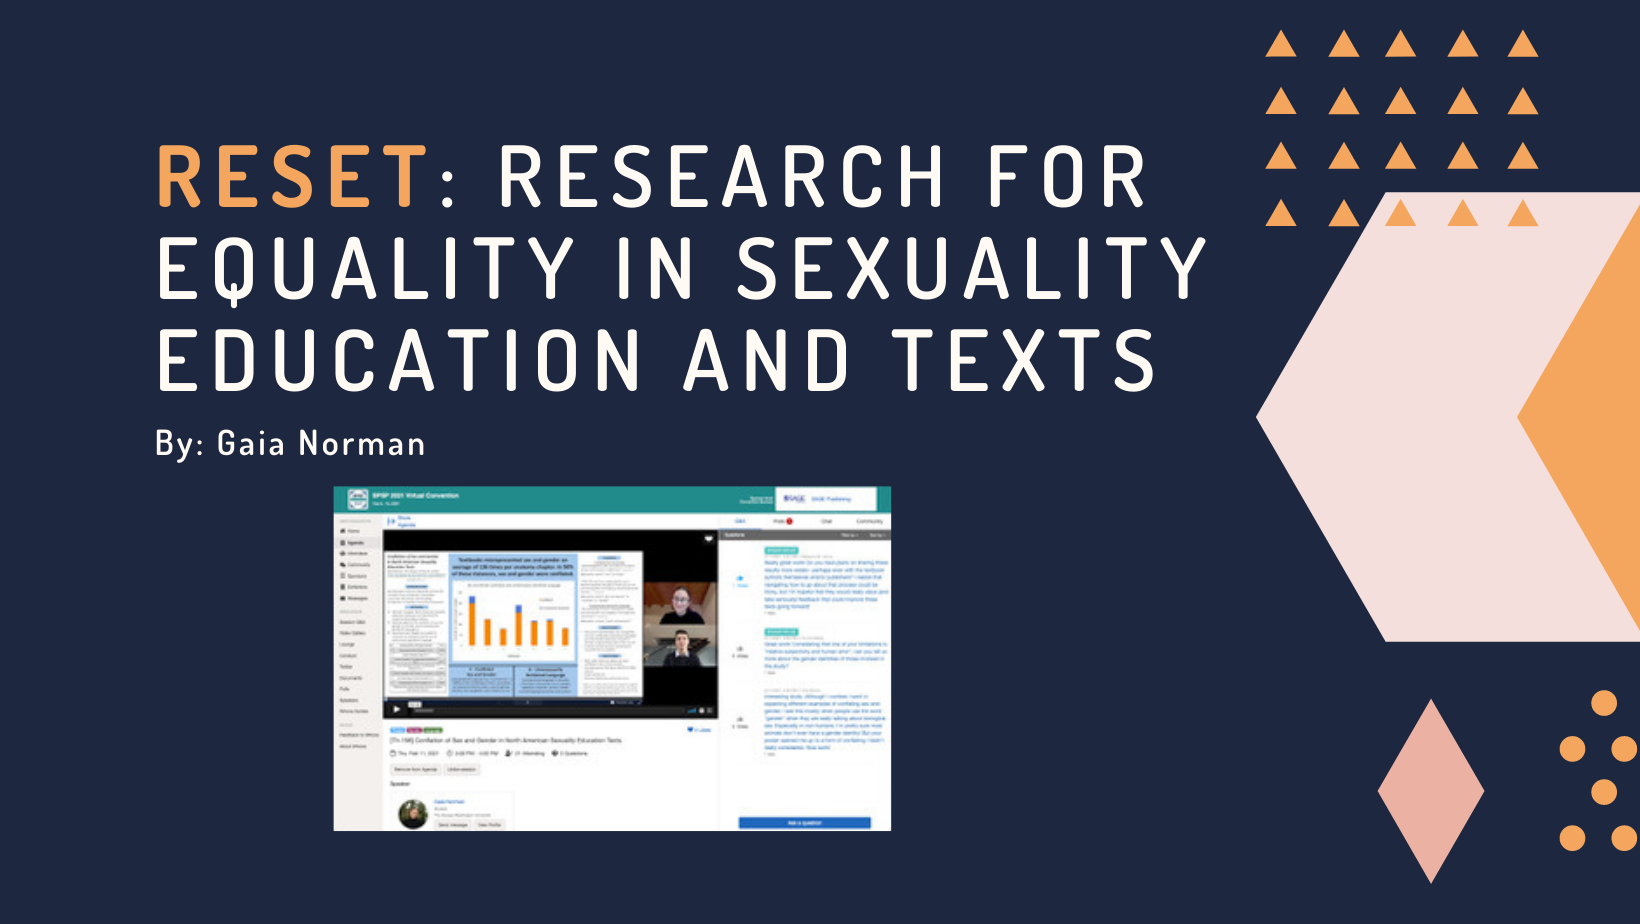 RESET: Research for Equality in Sexuality Education and Texts